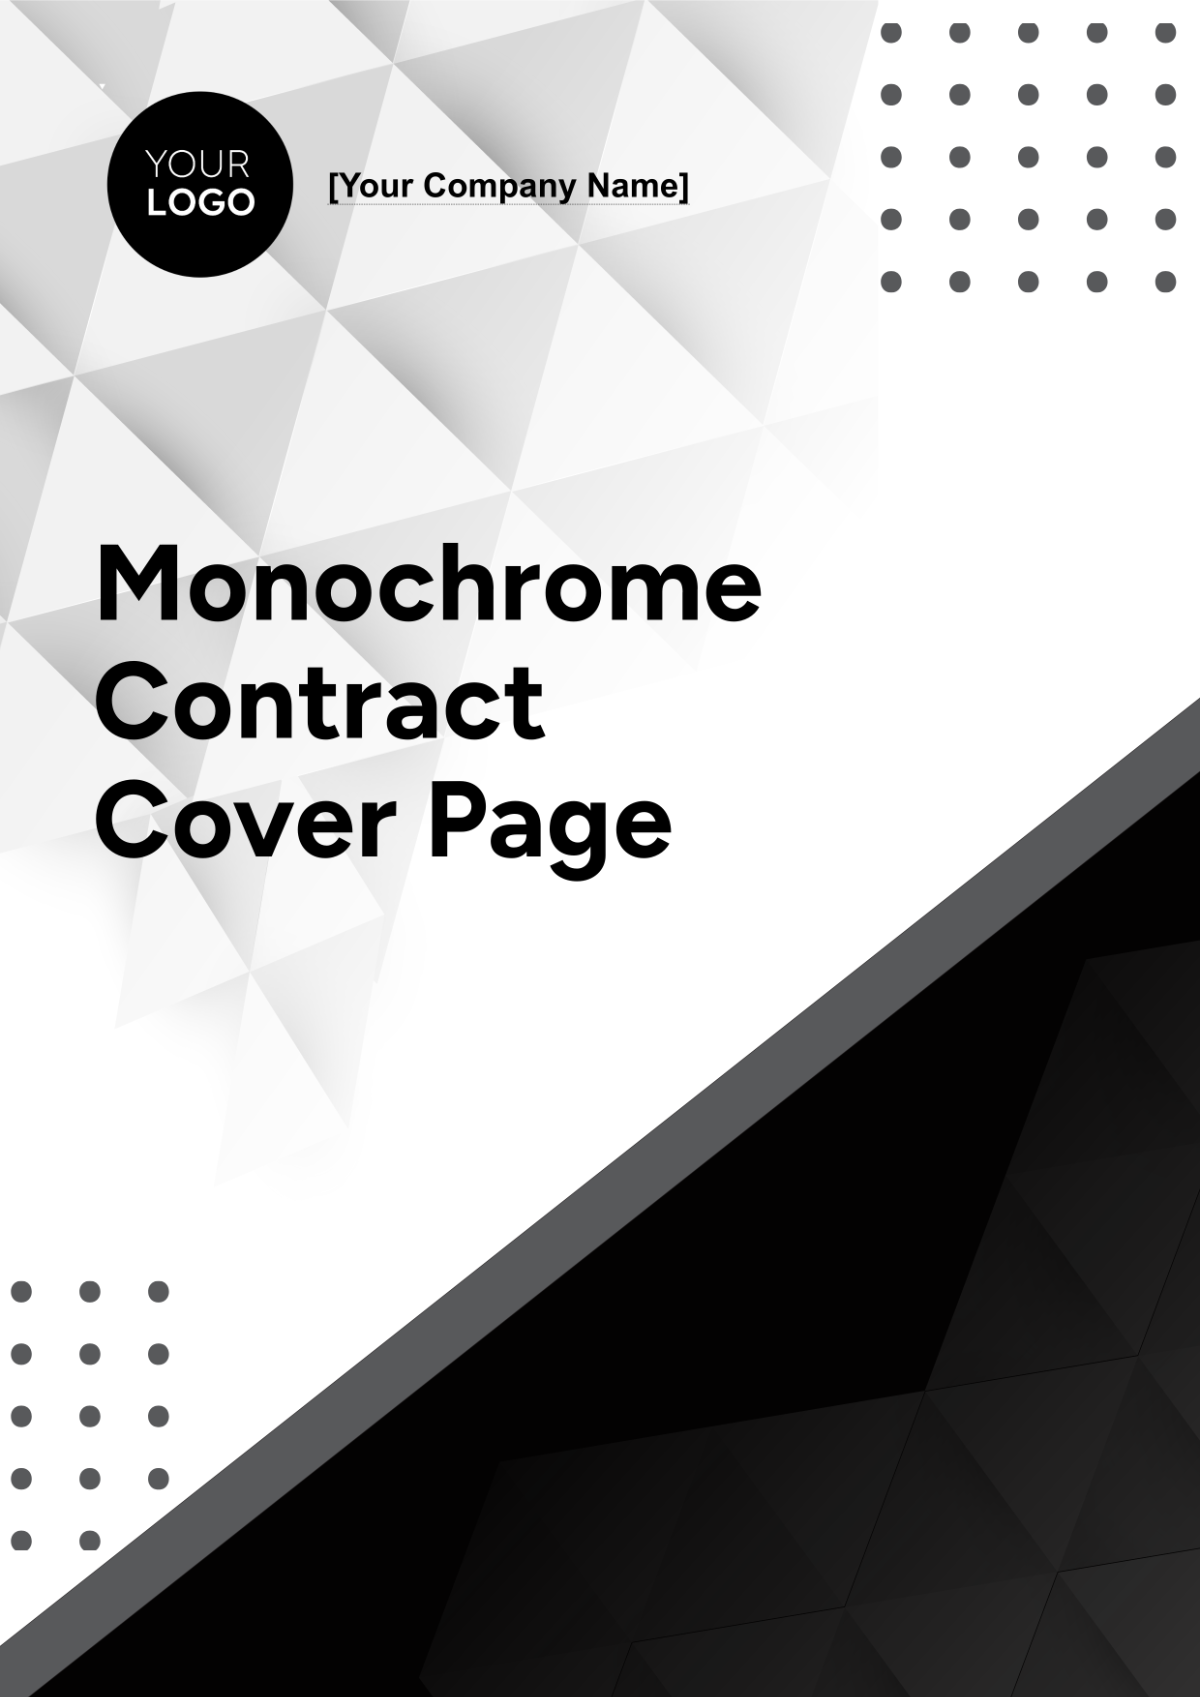 Monochrome Contract Cover Page Template